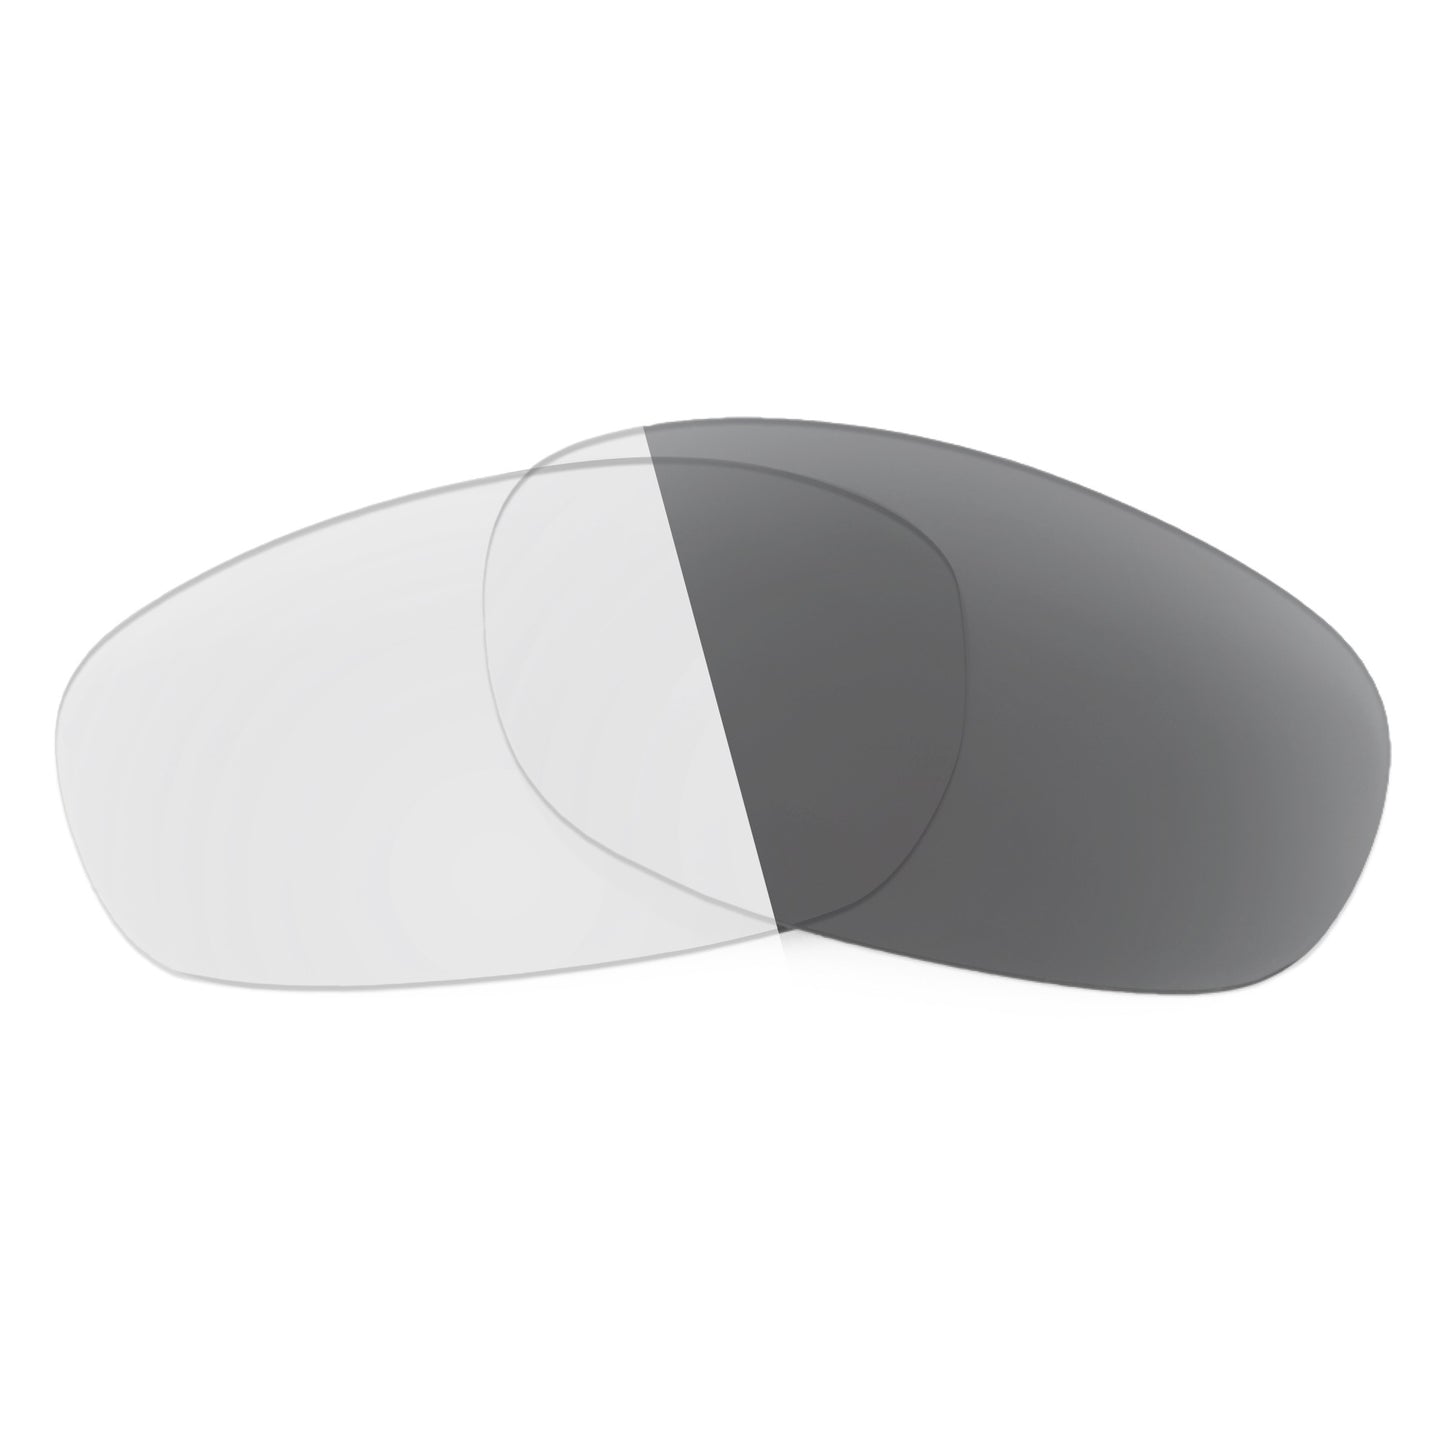 Revant replacement lenses for Ray-Ban RB3529 61mm Non-Polarized Adapt Gray Photochromic